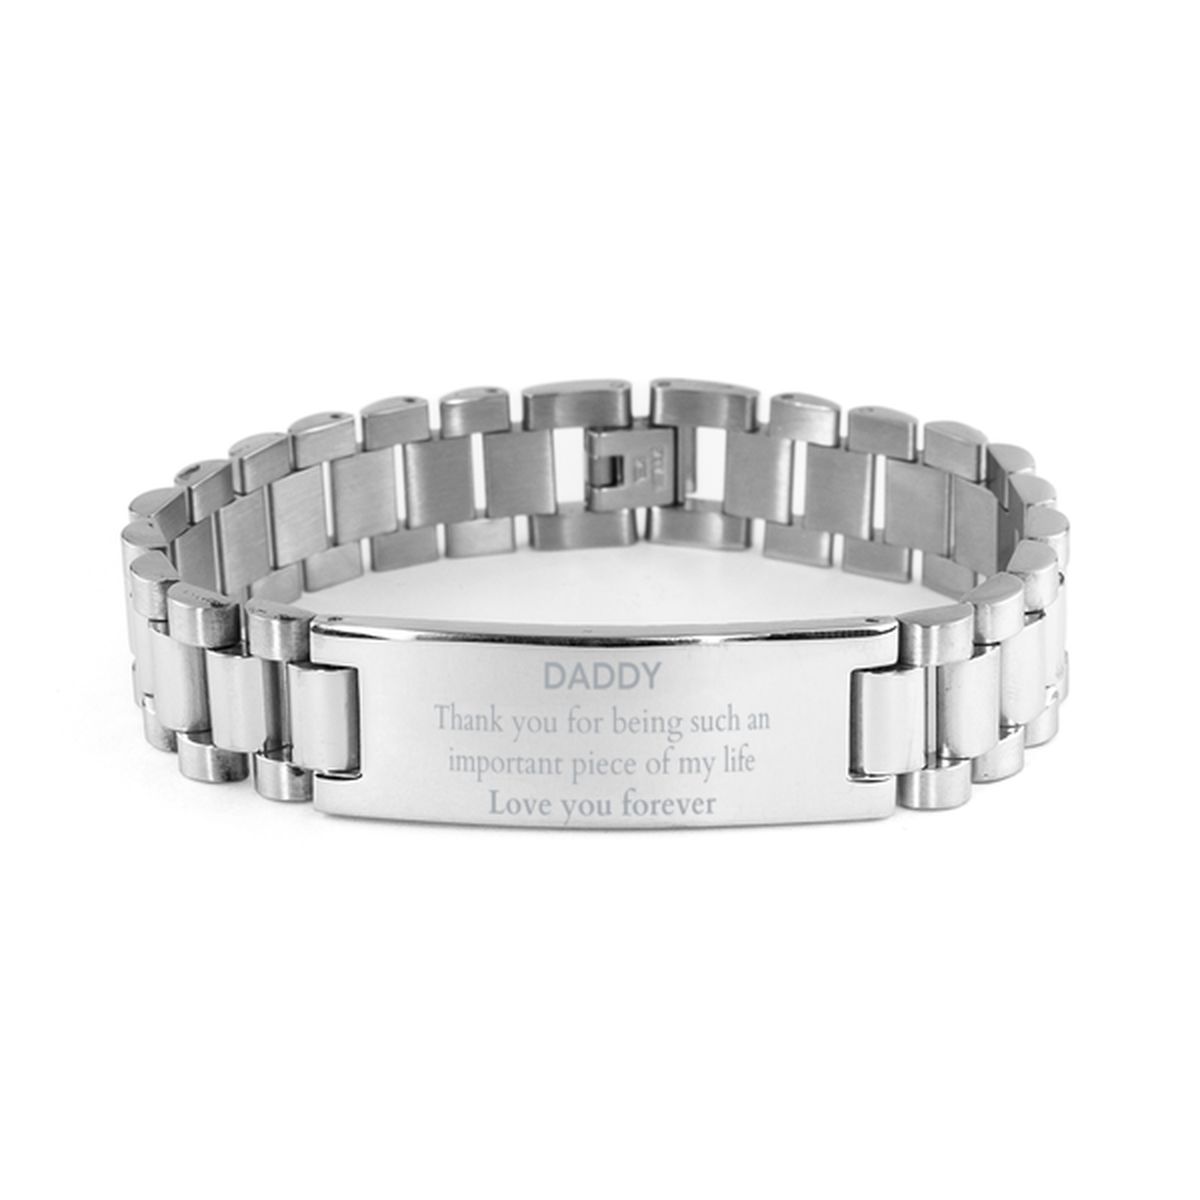 Appropriate Daddy Ladder Stainless Steel Bracelet Epic Birthday Gifts for Daddy Thank you for being such an important piece of my life Daddy Christmas Mothers Fathers Day